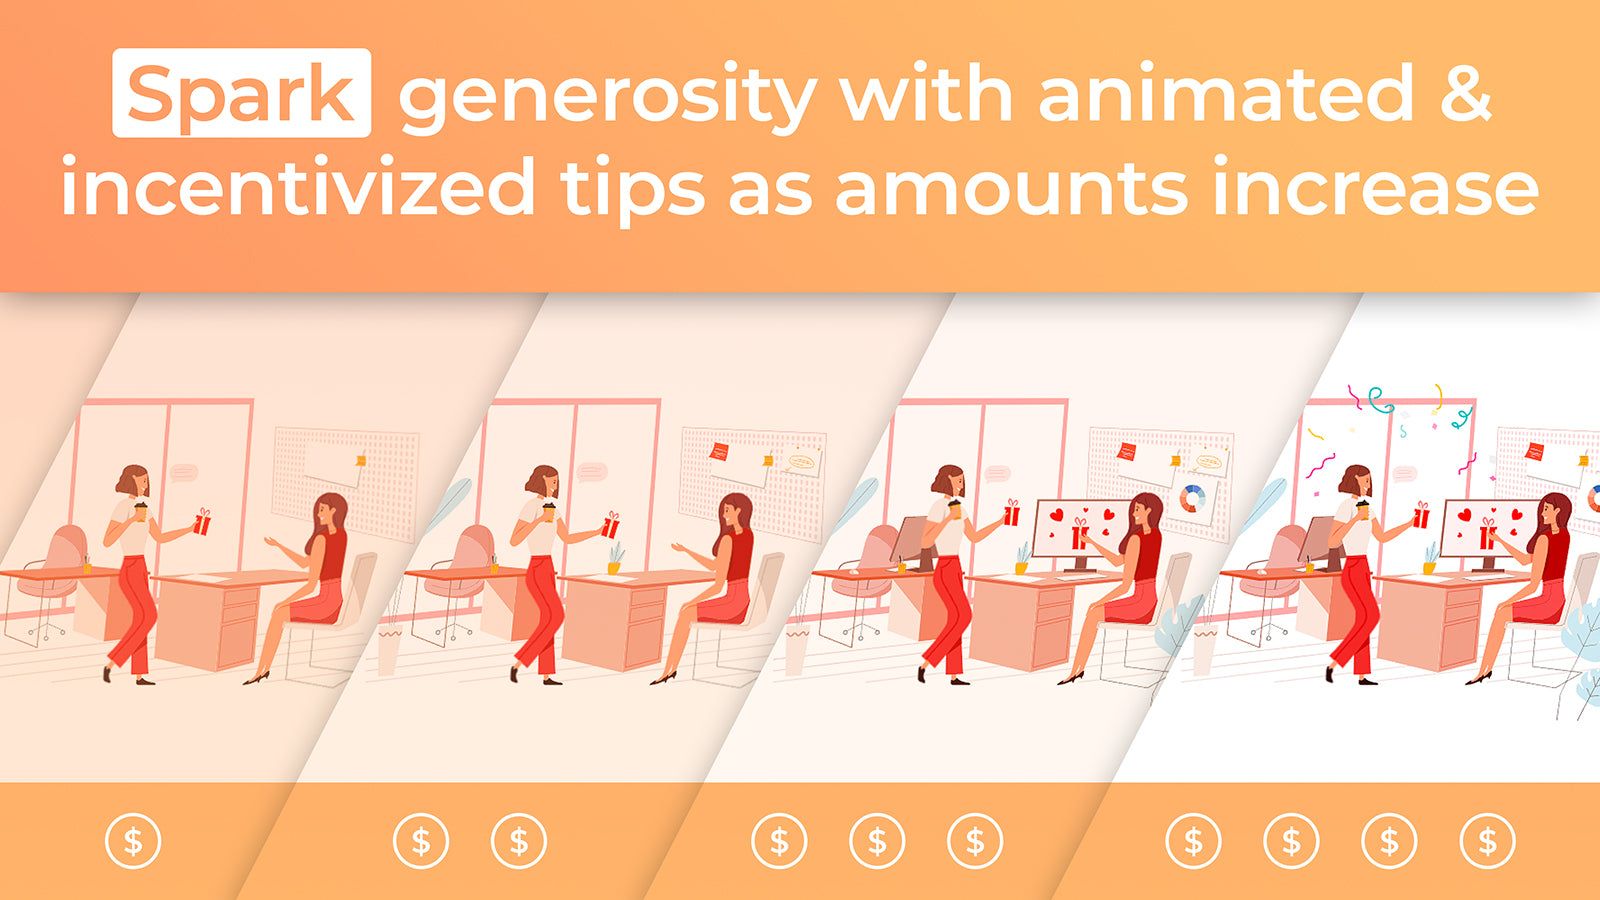 Spark generosity with animated & incentives tips as amounts grow